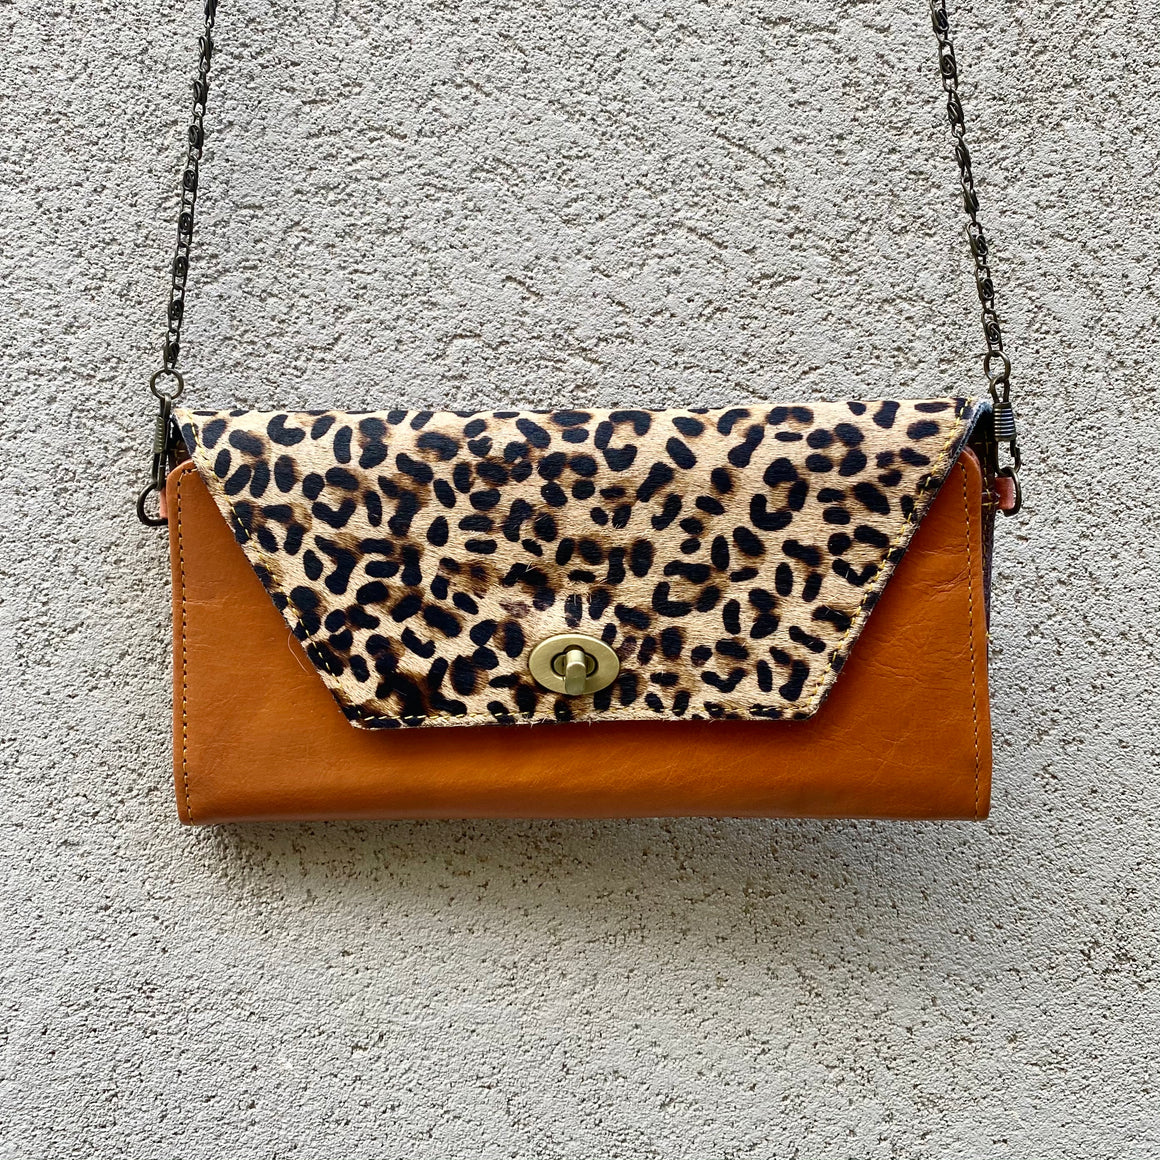 Harley Cowhide and Leather Crossbody Wallet Clutch - Sand Leopard, Dark Tan - KITTY KAT